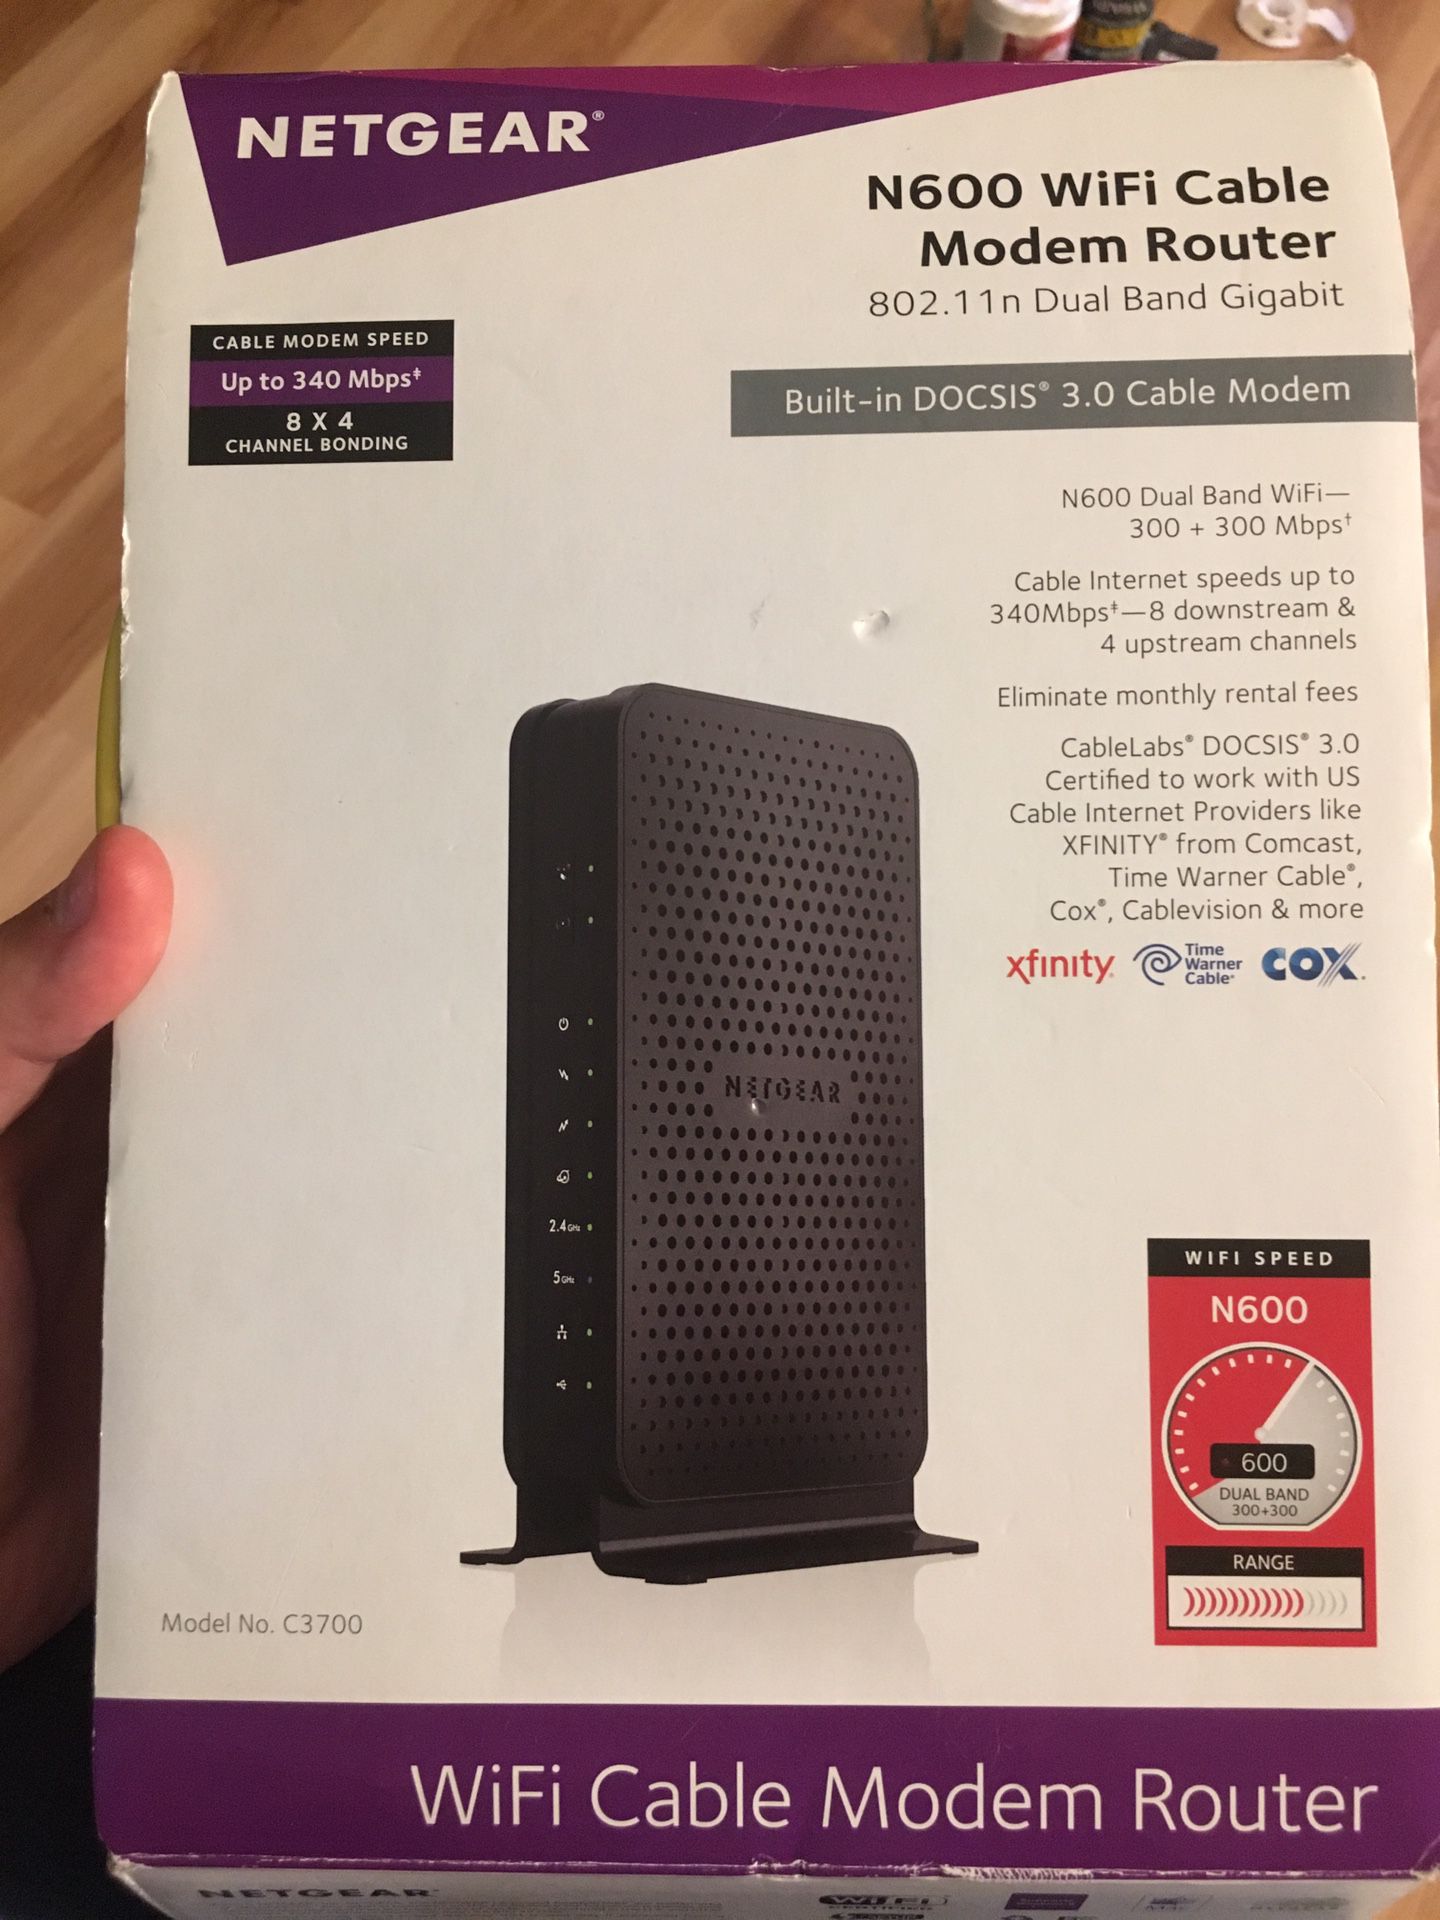 Netgear N600 WiFi cable dual band modem router